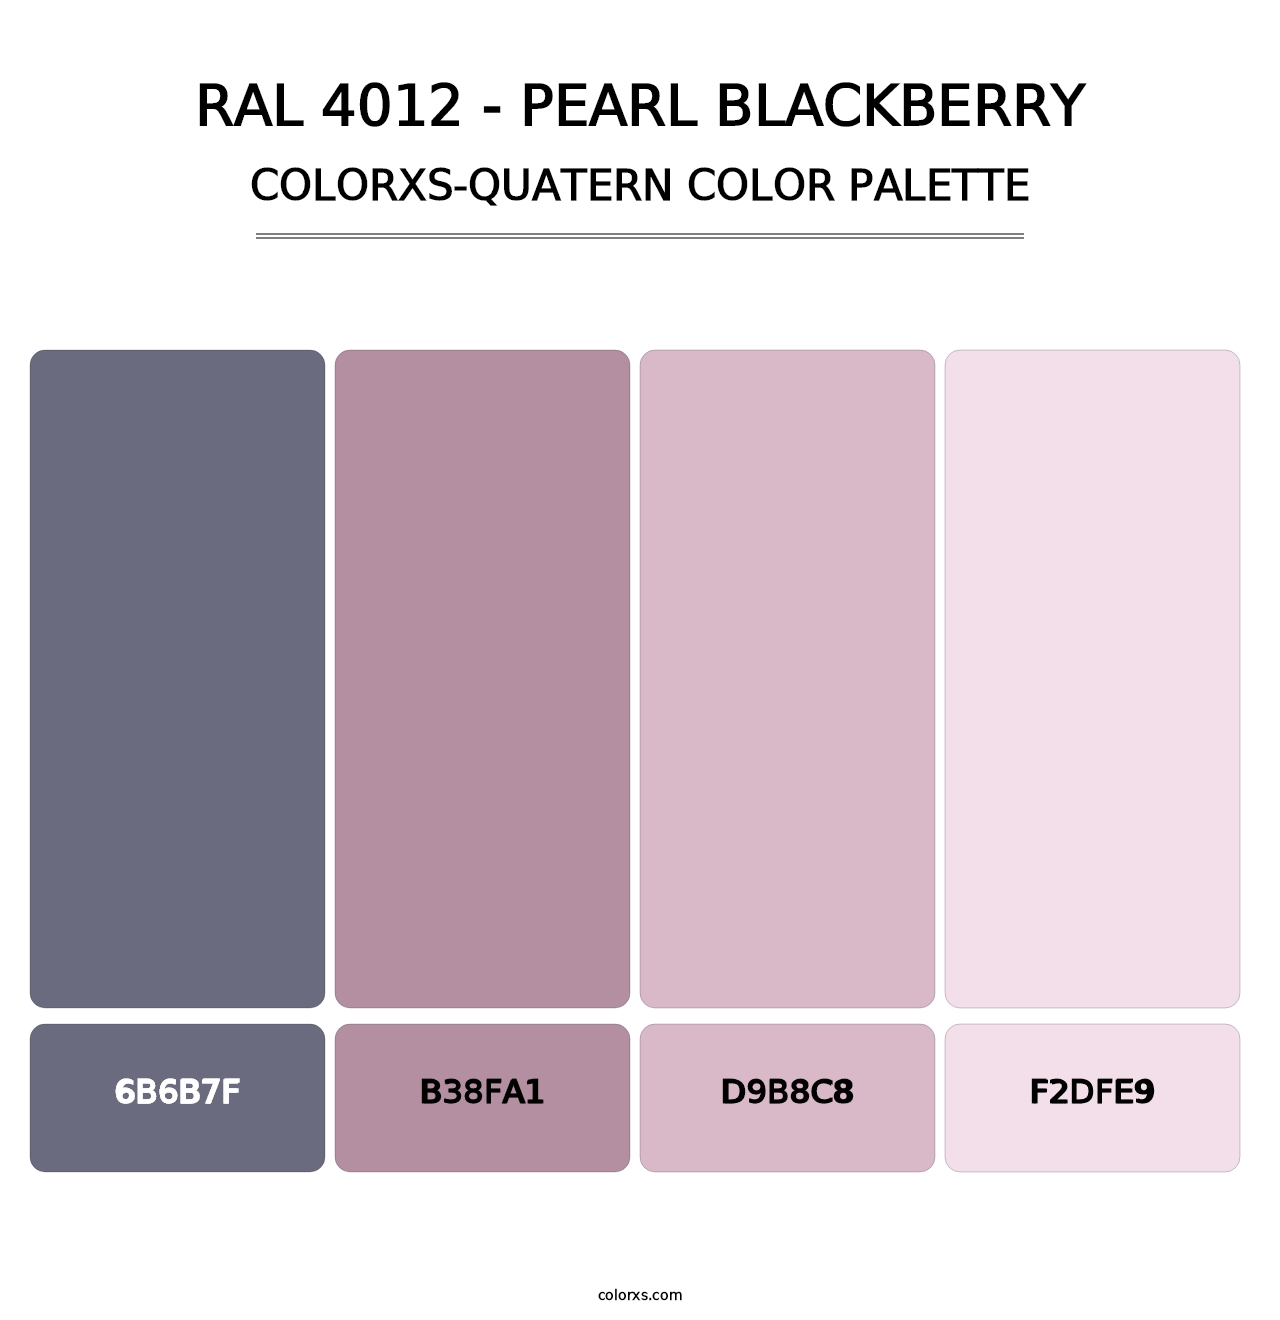 RAL 4012 - Pearl Blackberry - Colorxs Quatern Palette